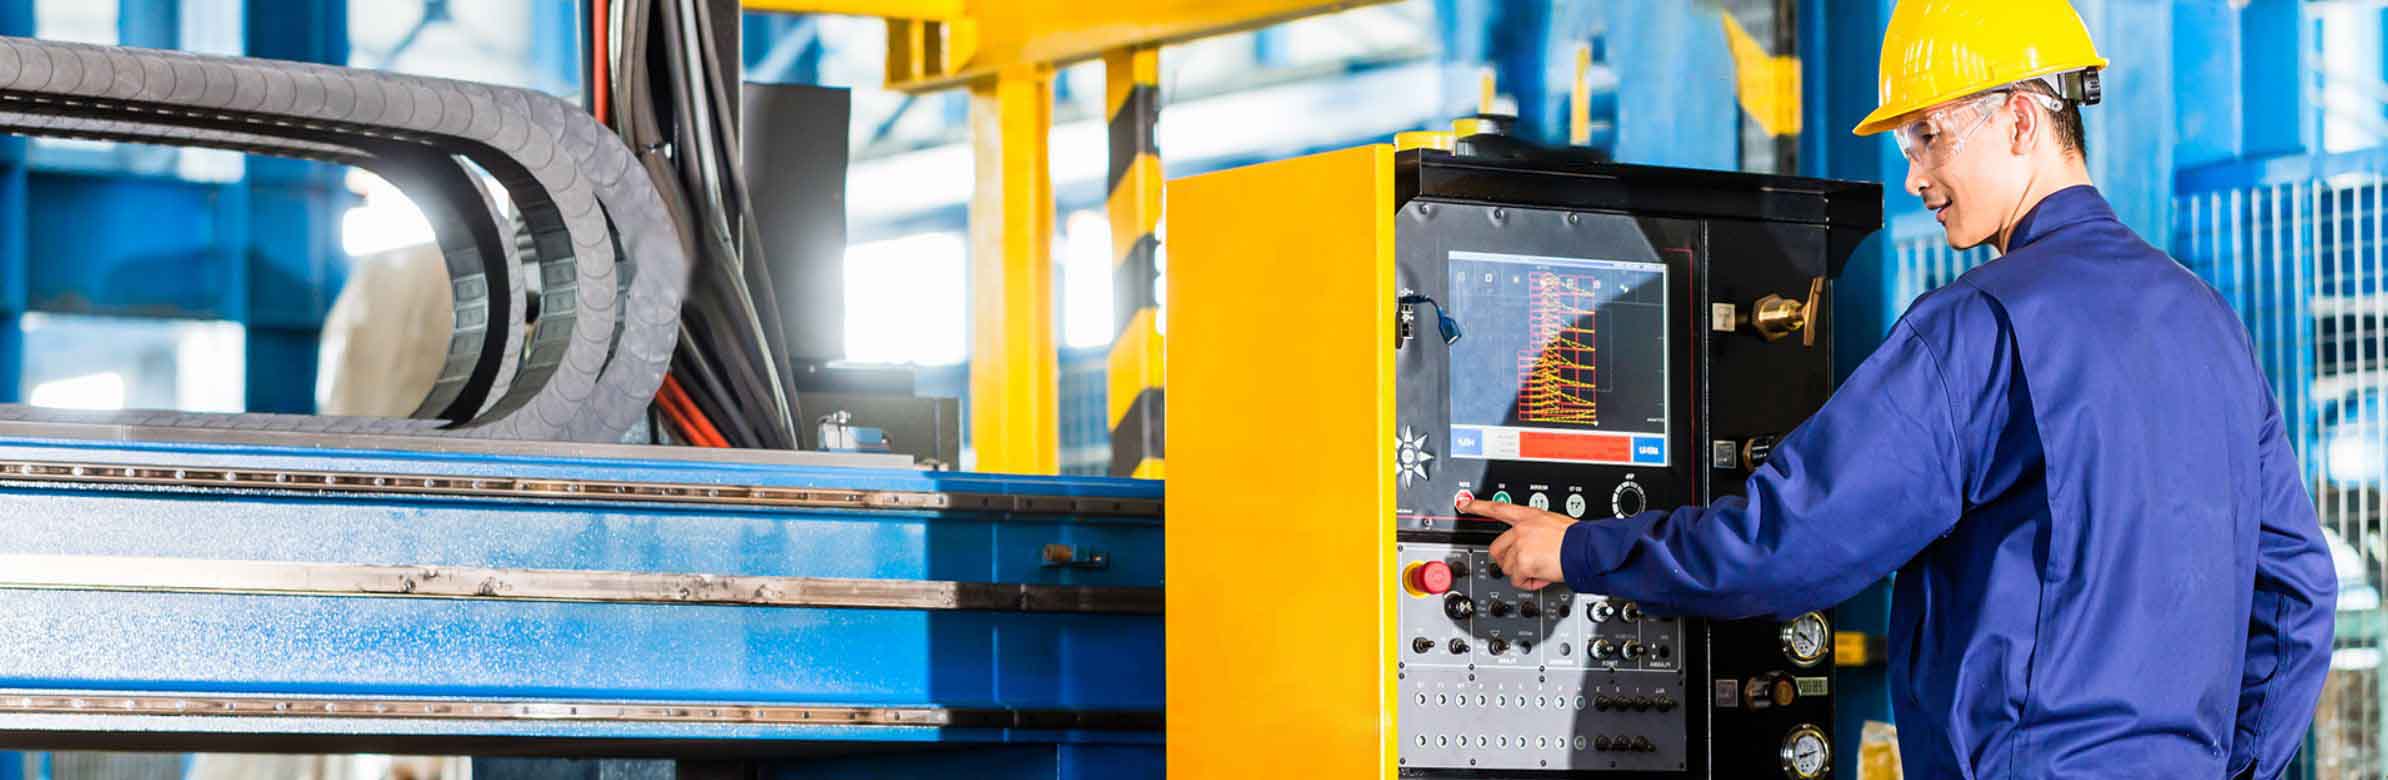 Strategic Safety Leadership in Manufacturing